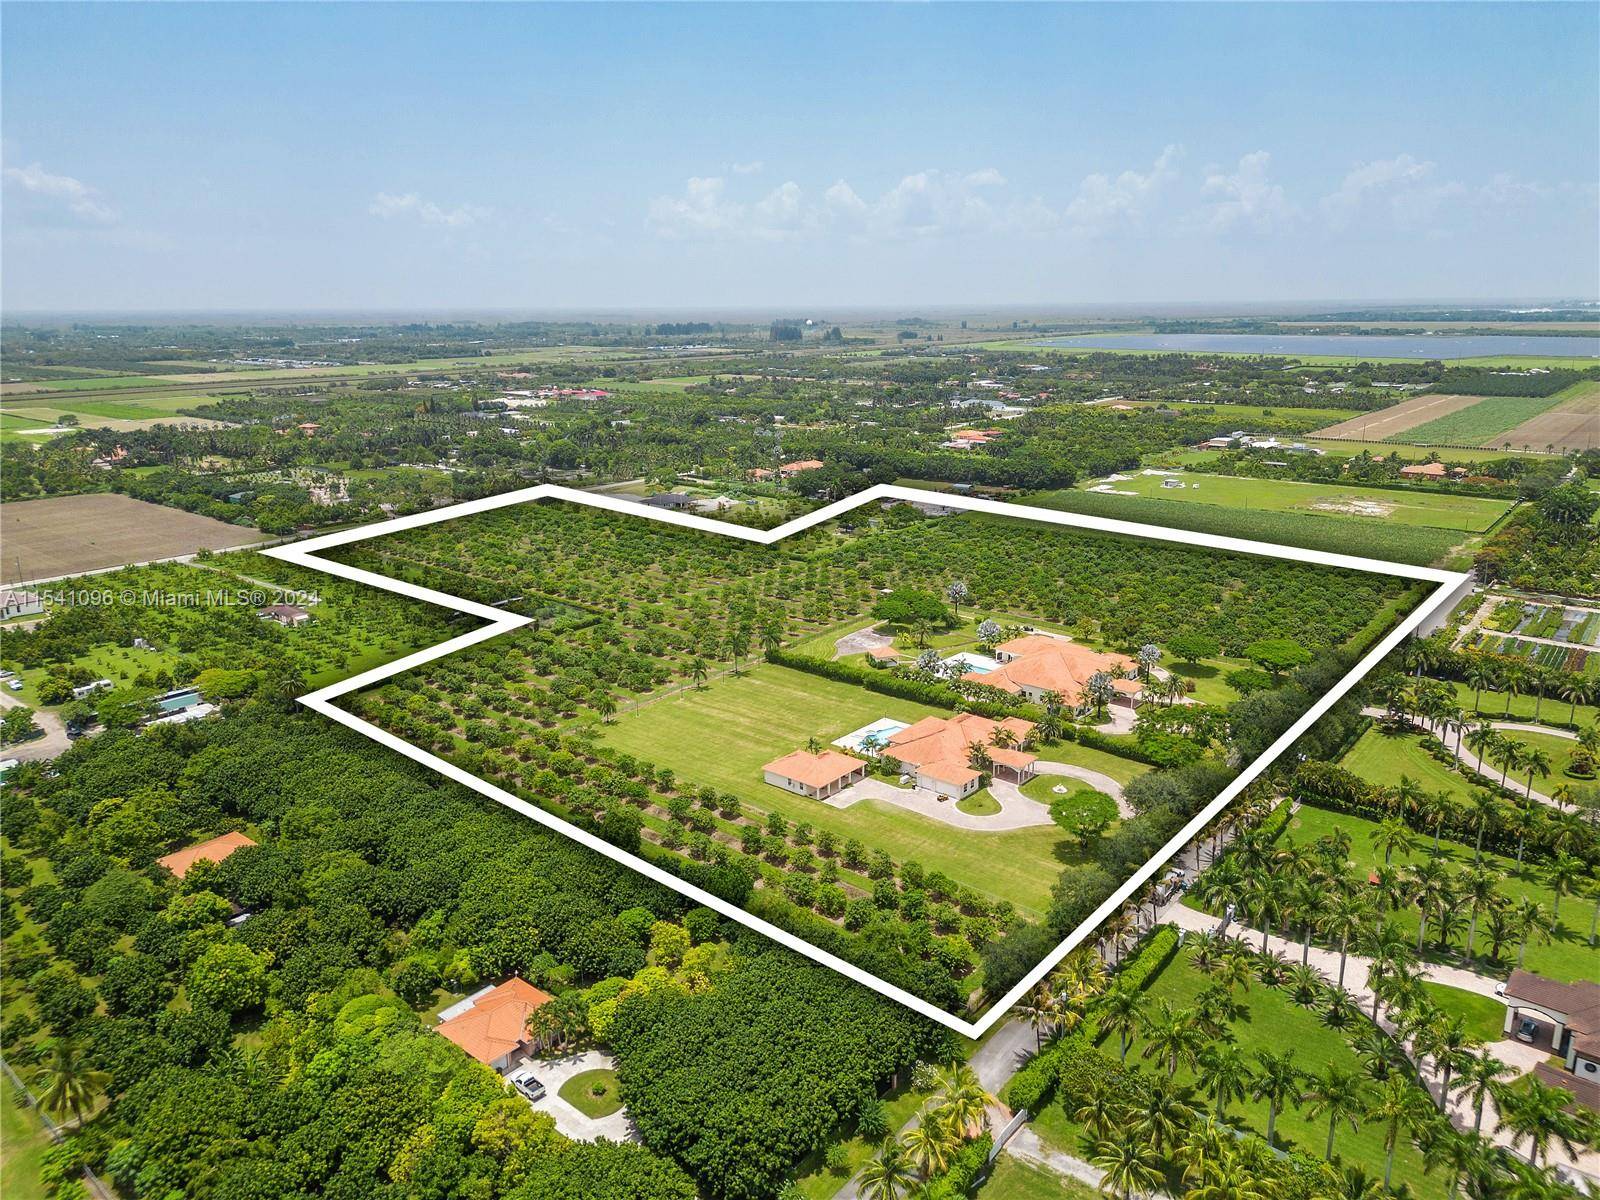 Unparalleled compound sprawled on 20 acres, gardens, pools and Lychee trees.